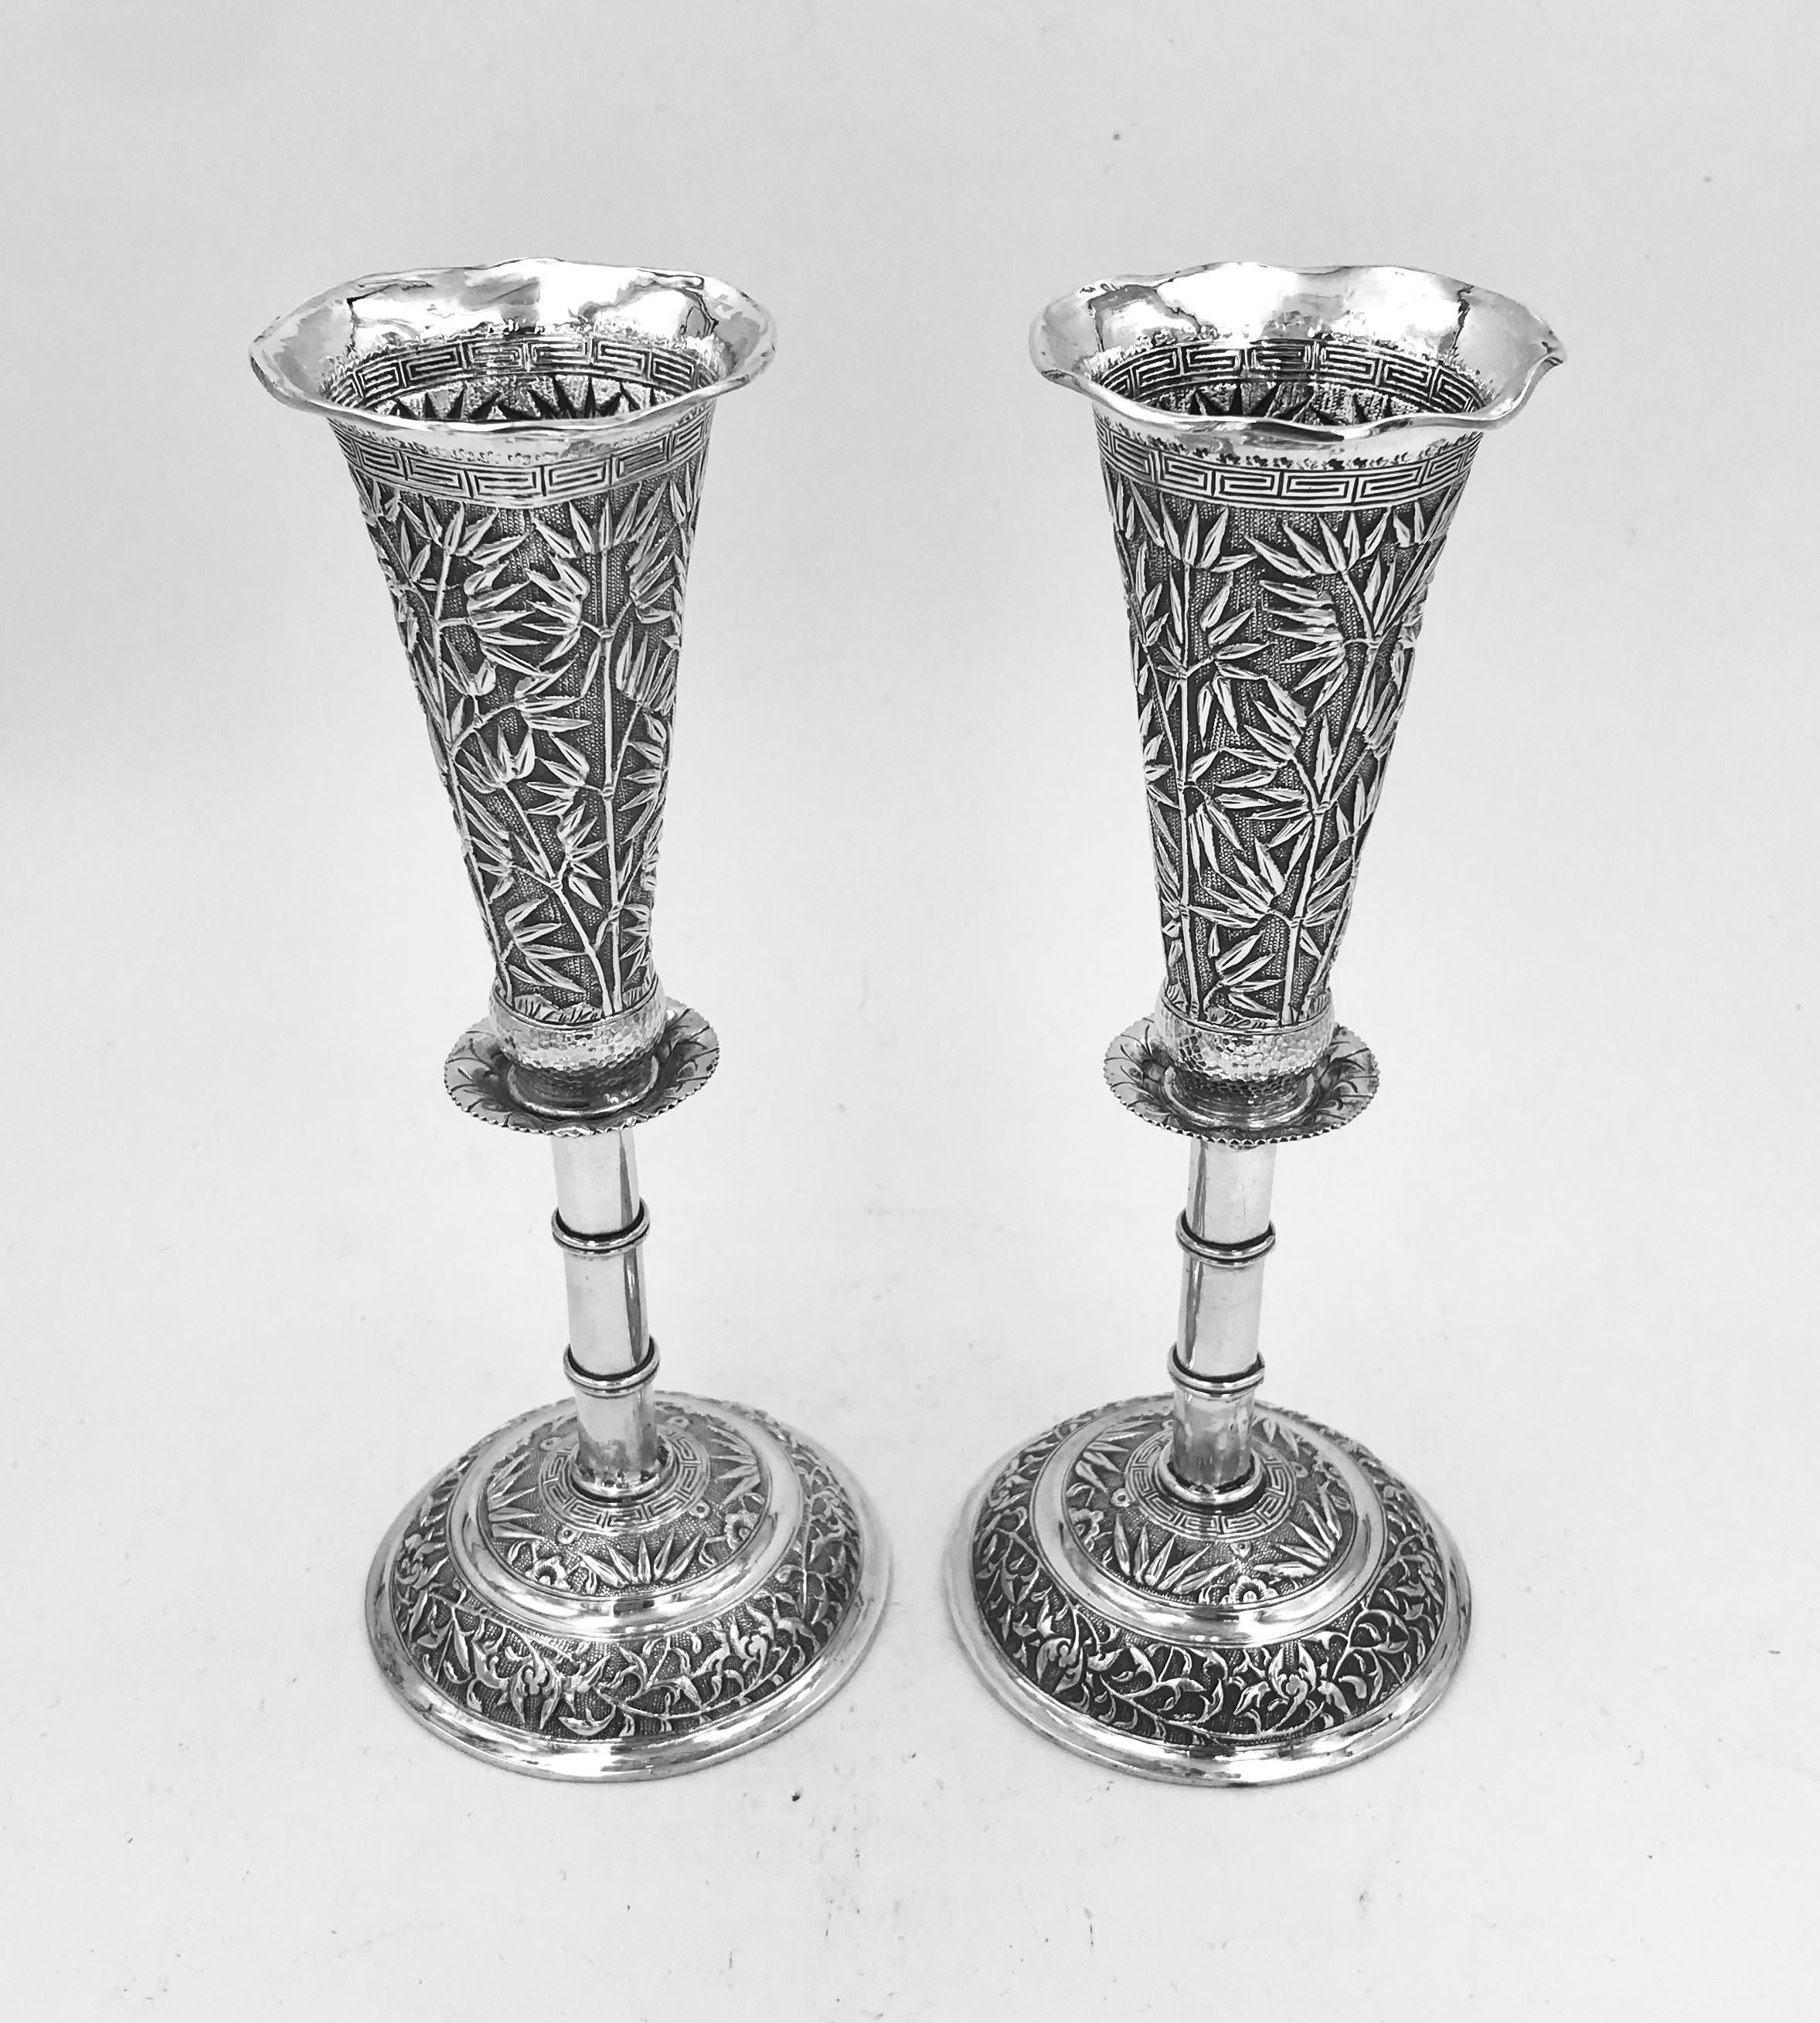 Pair of Chinese silver vases with all-over bamboo decoration and each with a wavy-edge flared rim. They were made by 涂茂兴, TuMaoXing, a retailer in JiuJiang (九江), next to the Yangtze River, in Jiangxi Province, and date from circa 1895.